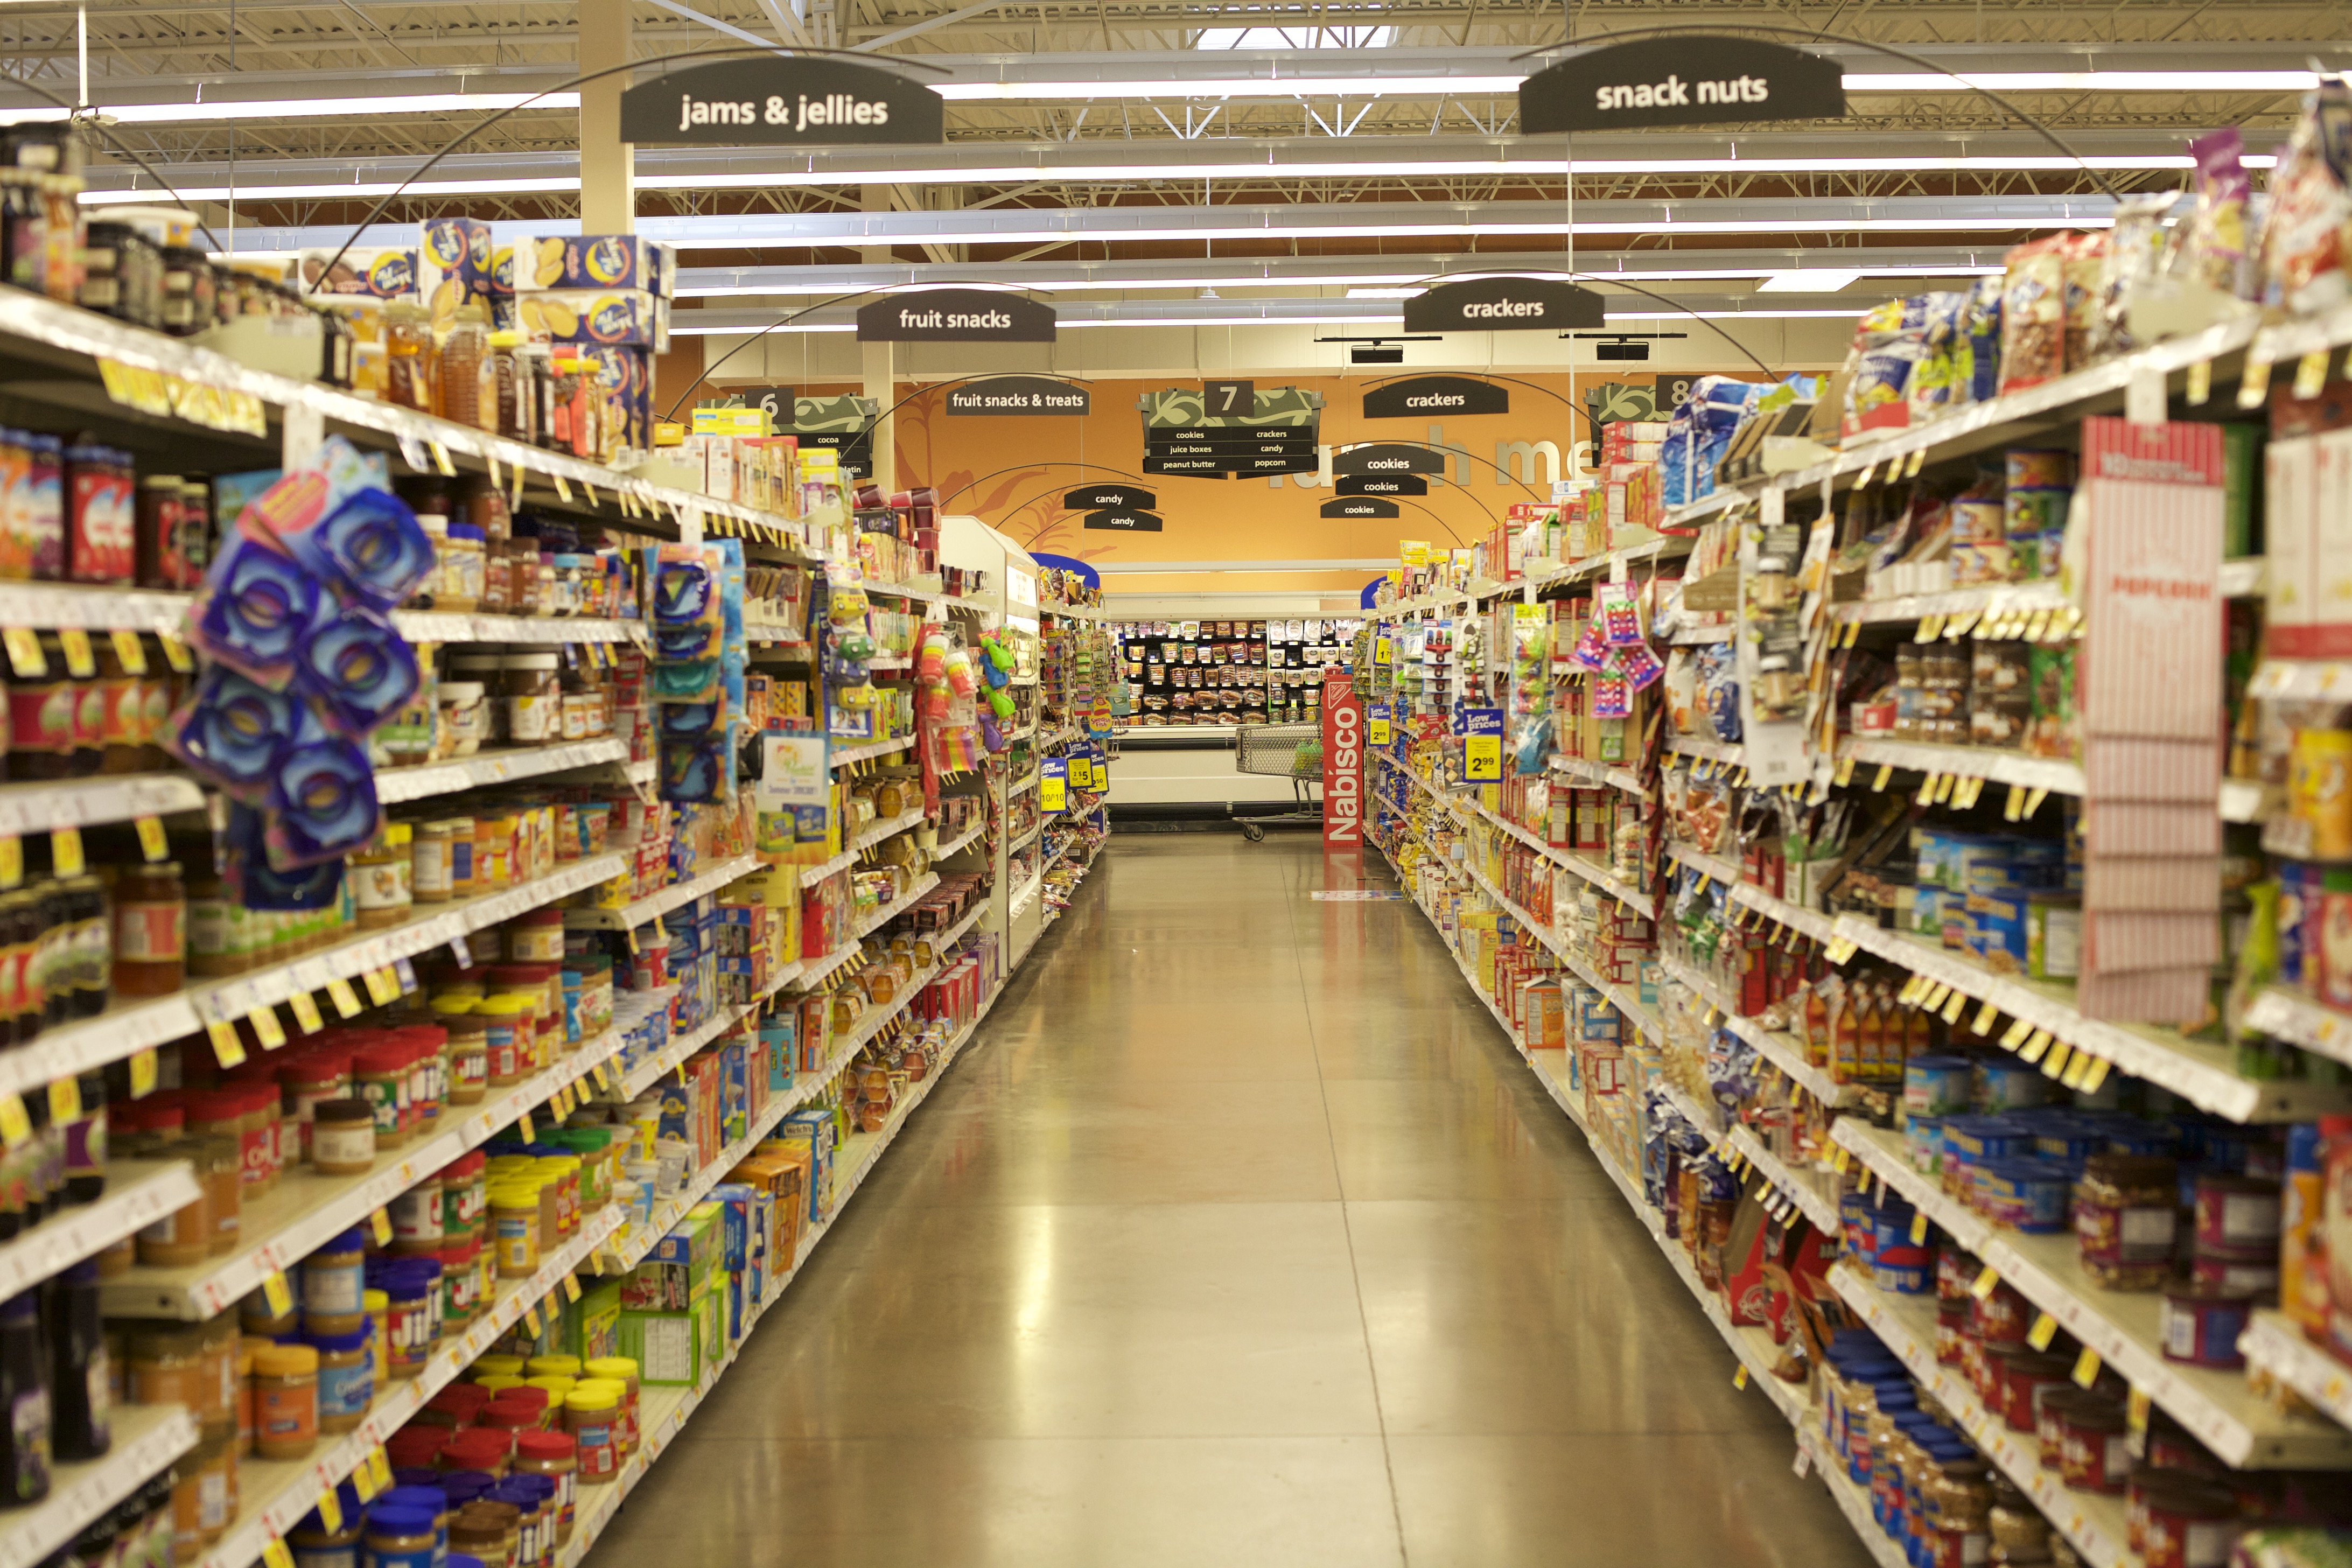 4+ REASONS TO SHOP YOUR LOCAL KROGER GROCERY STORE